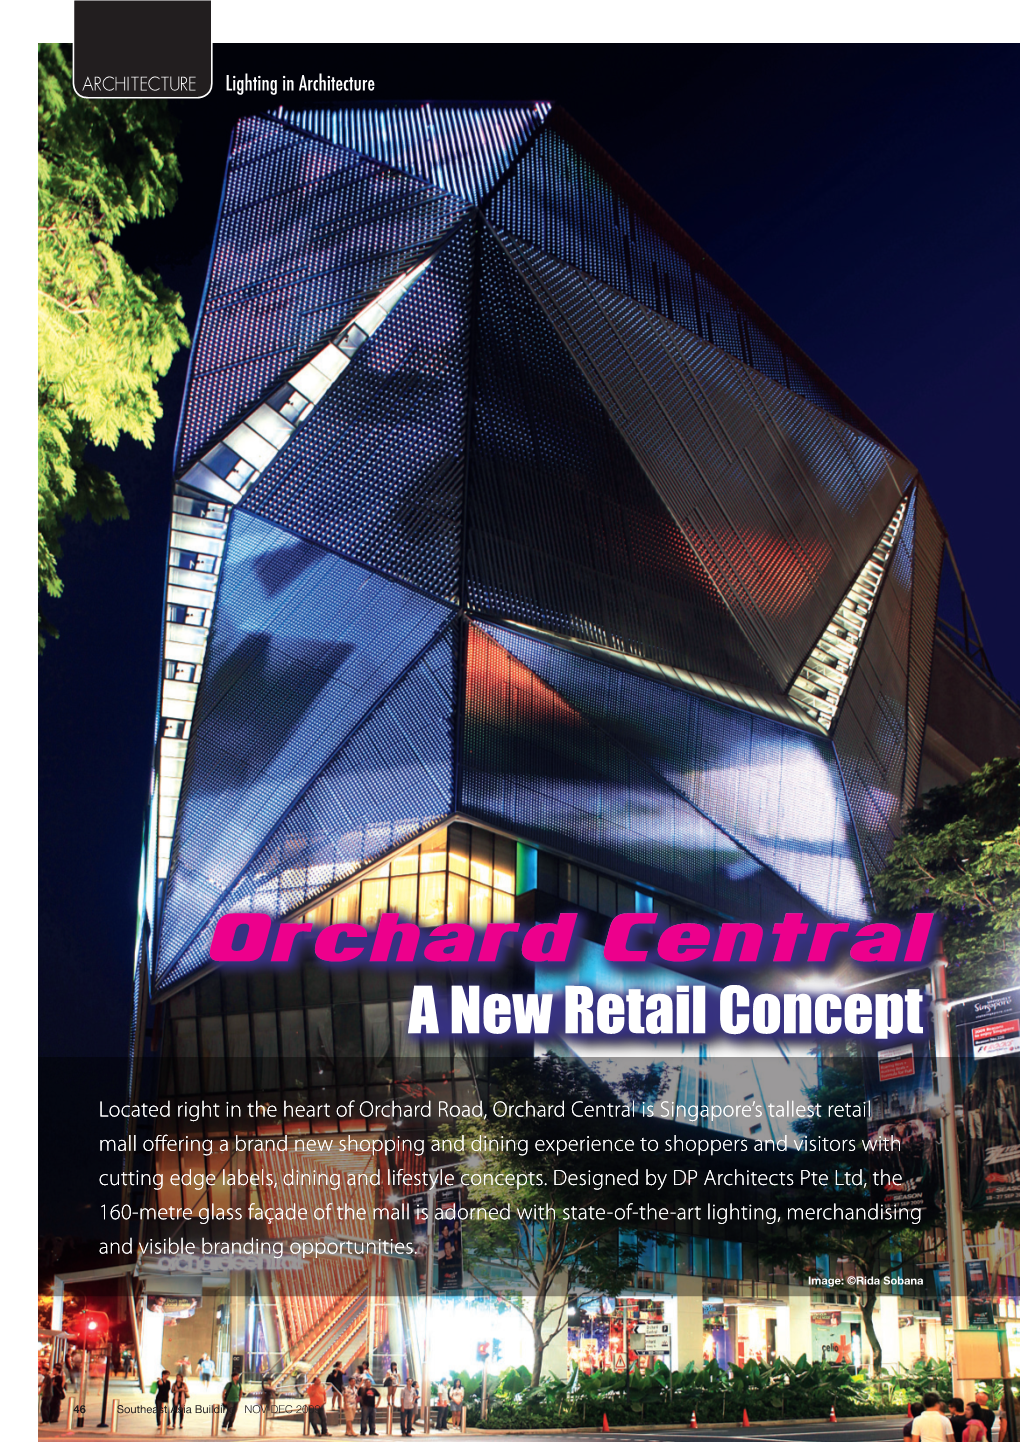 Orchard Central a New Retail Concept